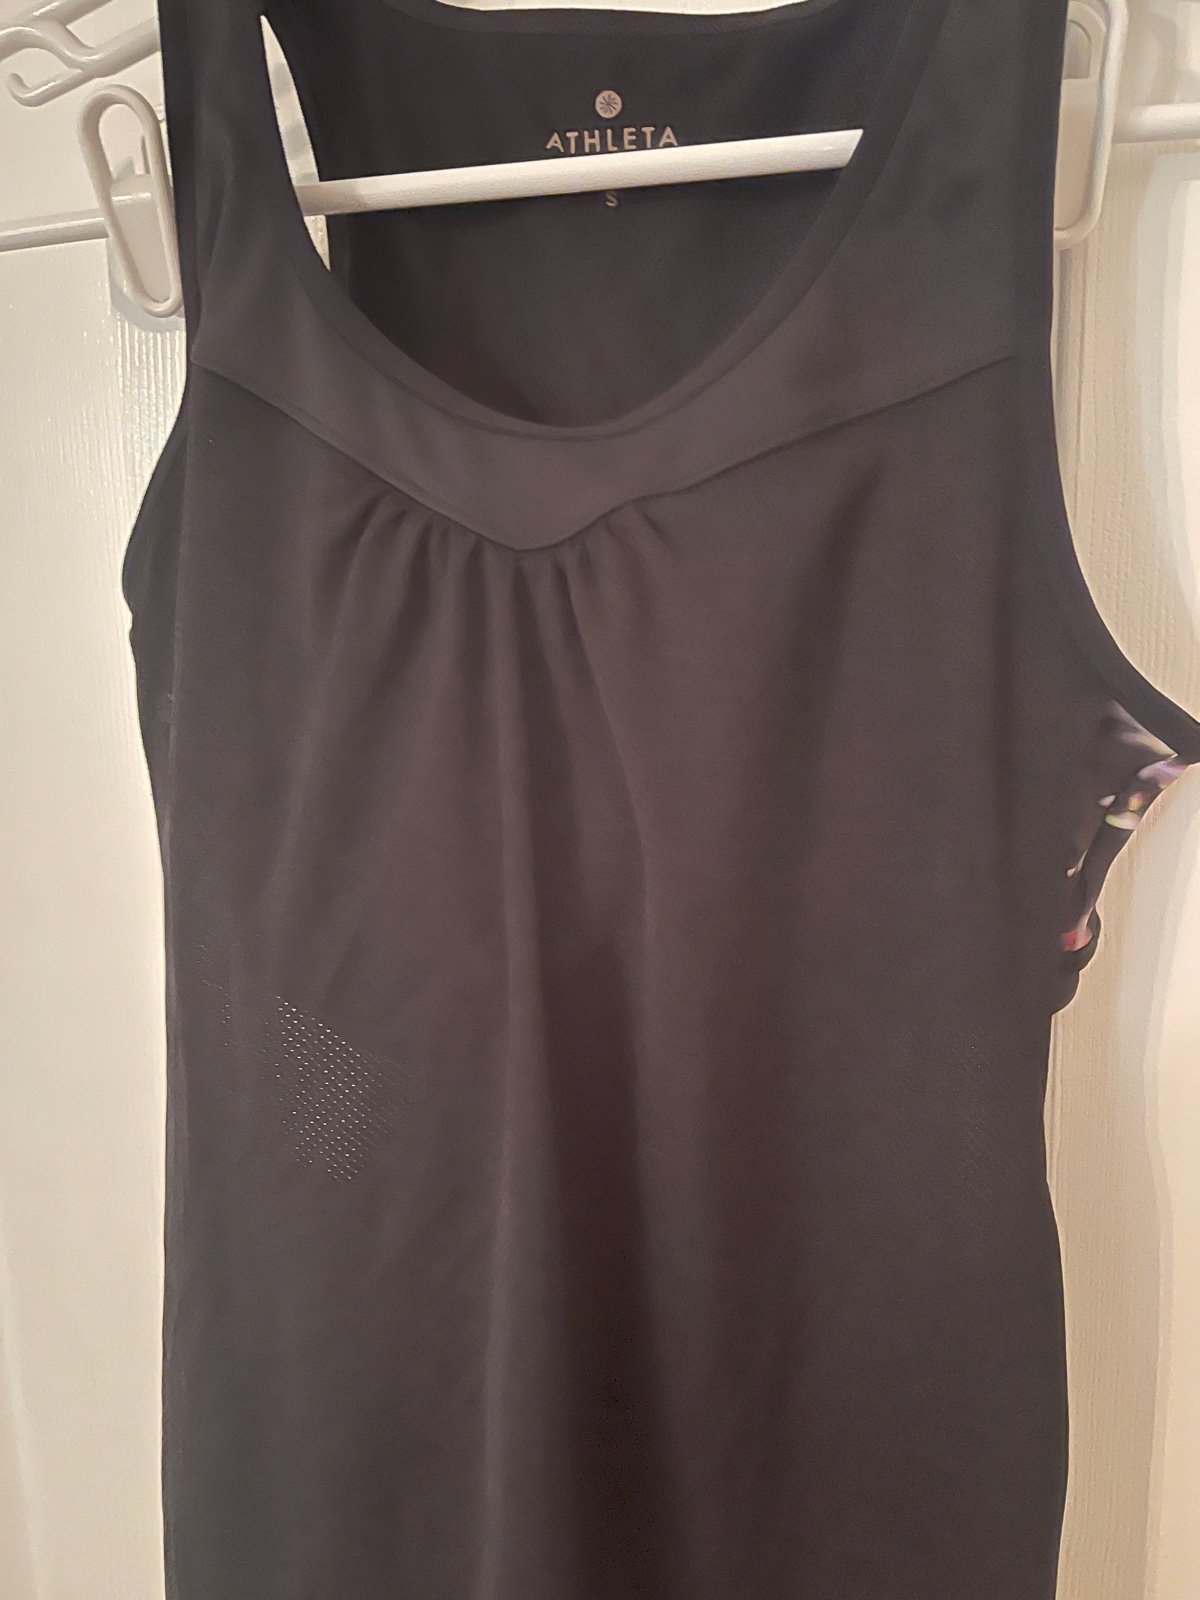 Stylish Athleta tank with built in bra hZg0LZgDT Great